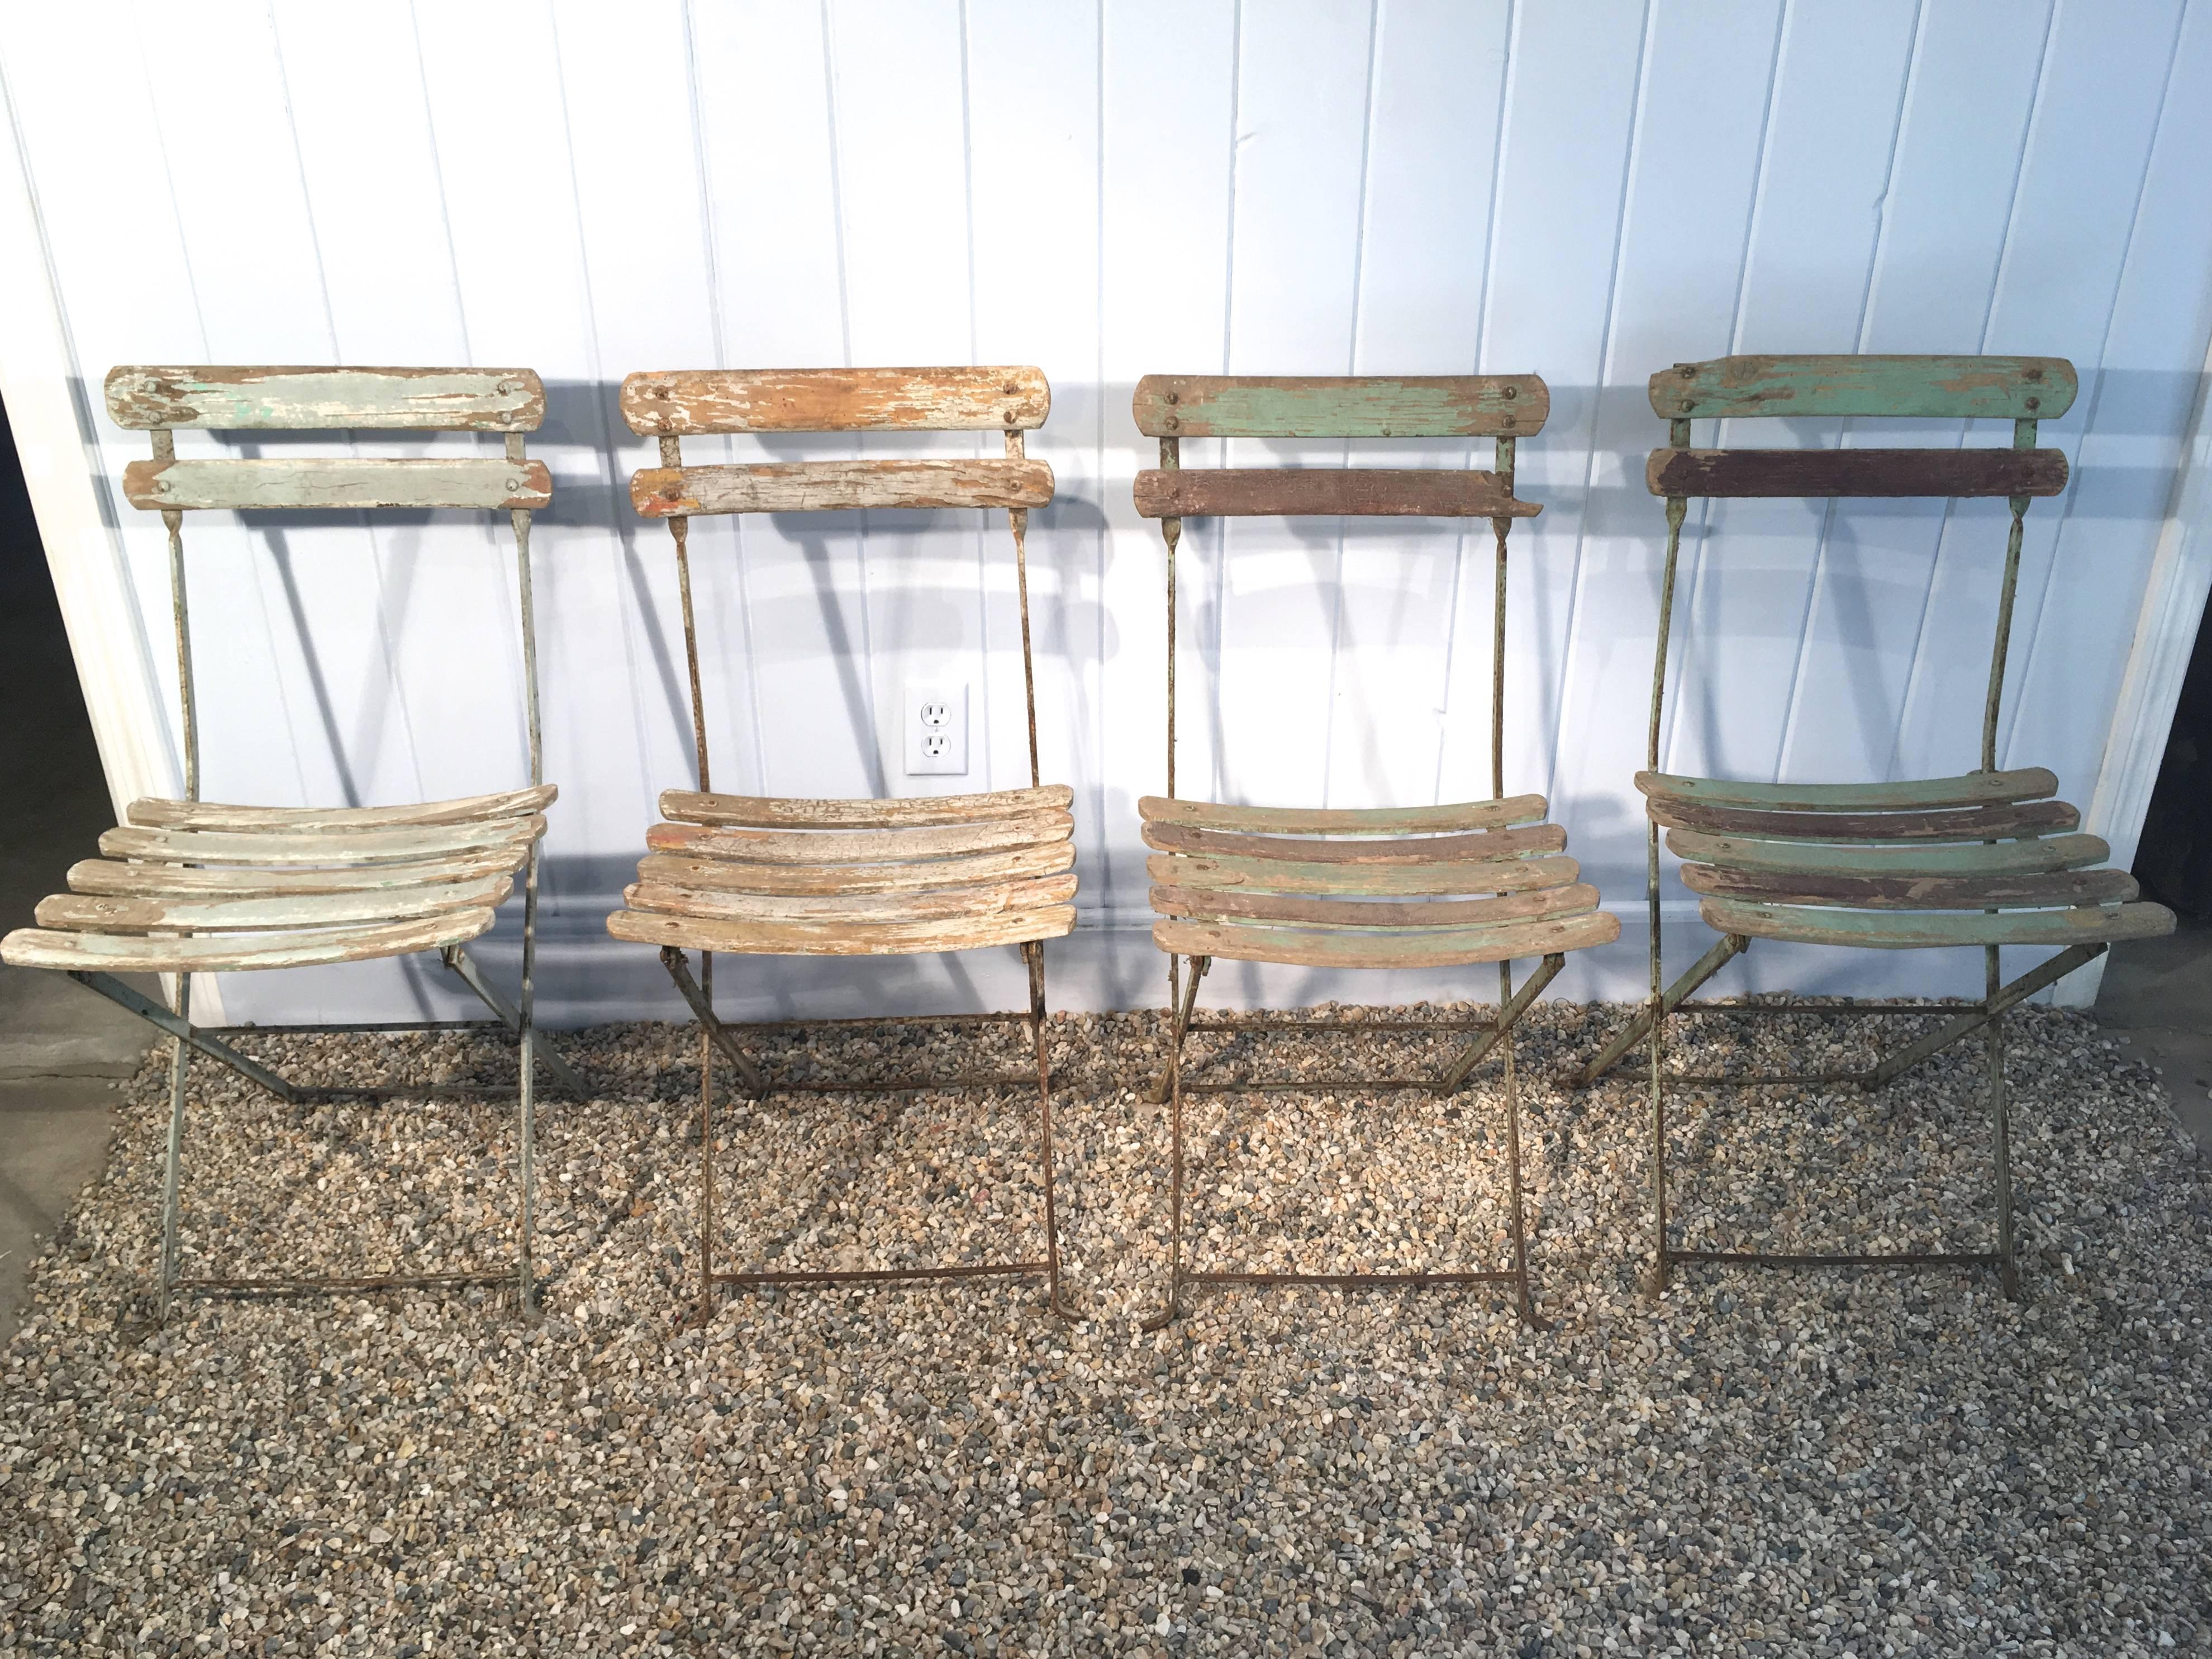 Great set of French folding wood (likely oak) and iron bistro chairs in faded pale blue/green paint with weathering. In great condition, except for a small missing piece to back slat on two chairs. Perfectly suited to indoor or outdoor use and they